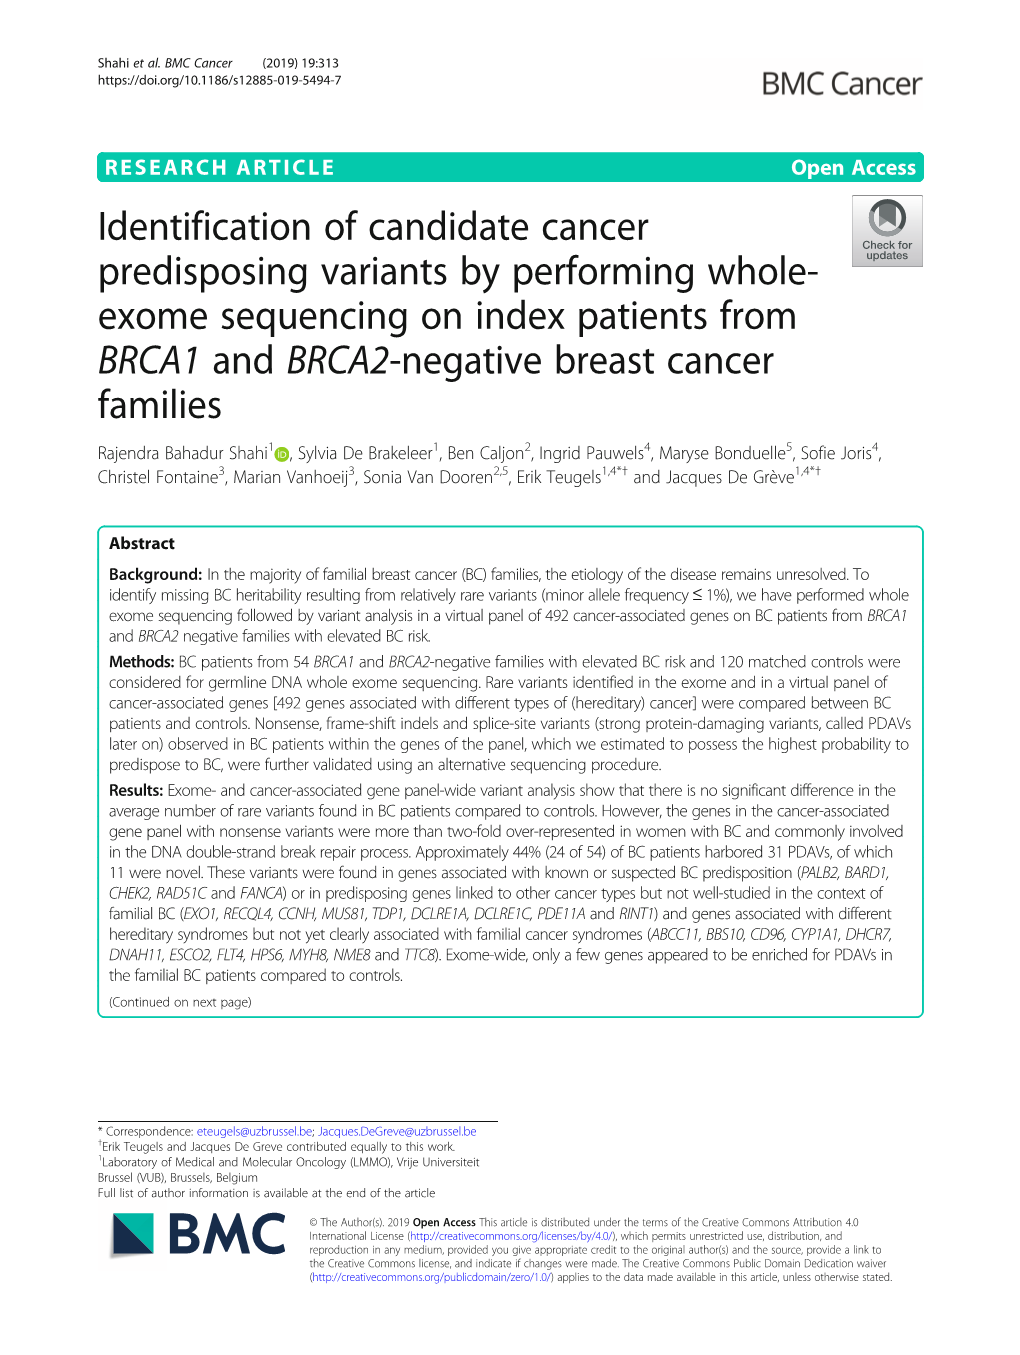 Exome Sequencing on Index Patients from BRCA1 and BRCA2-Negative